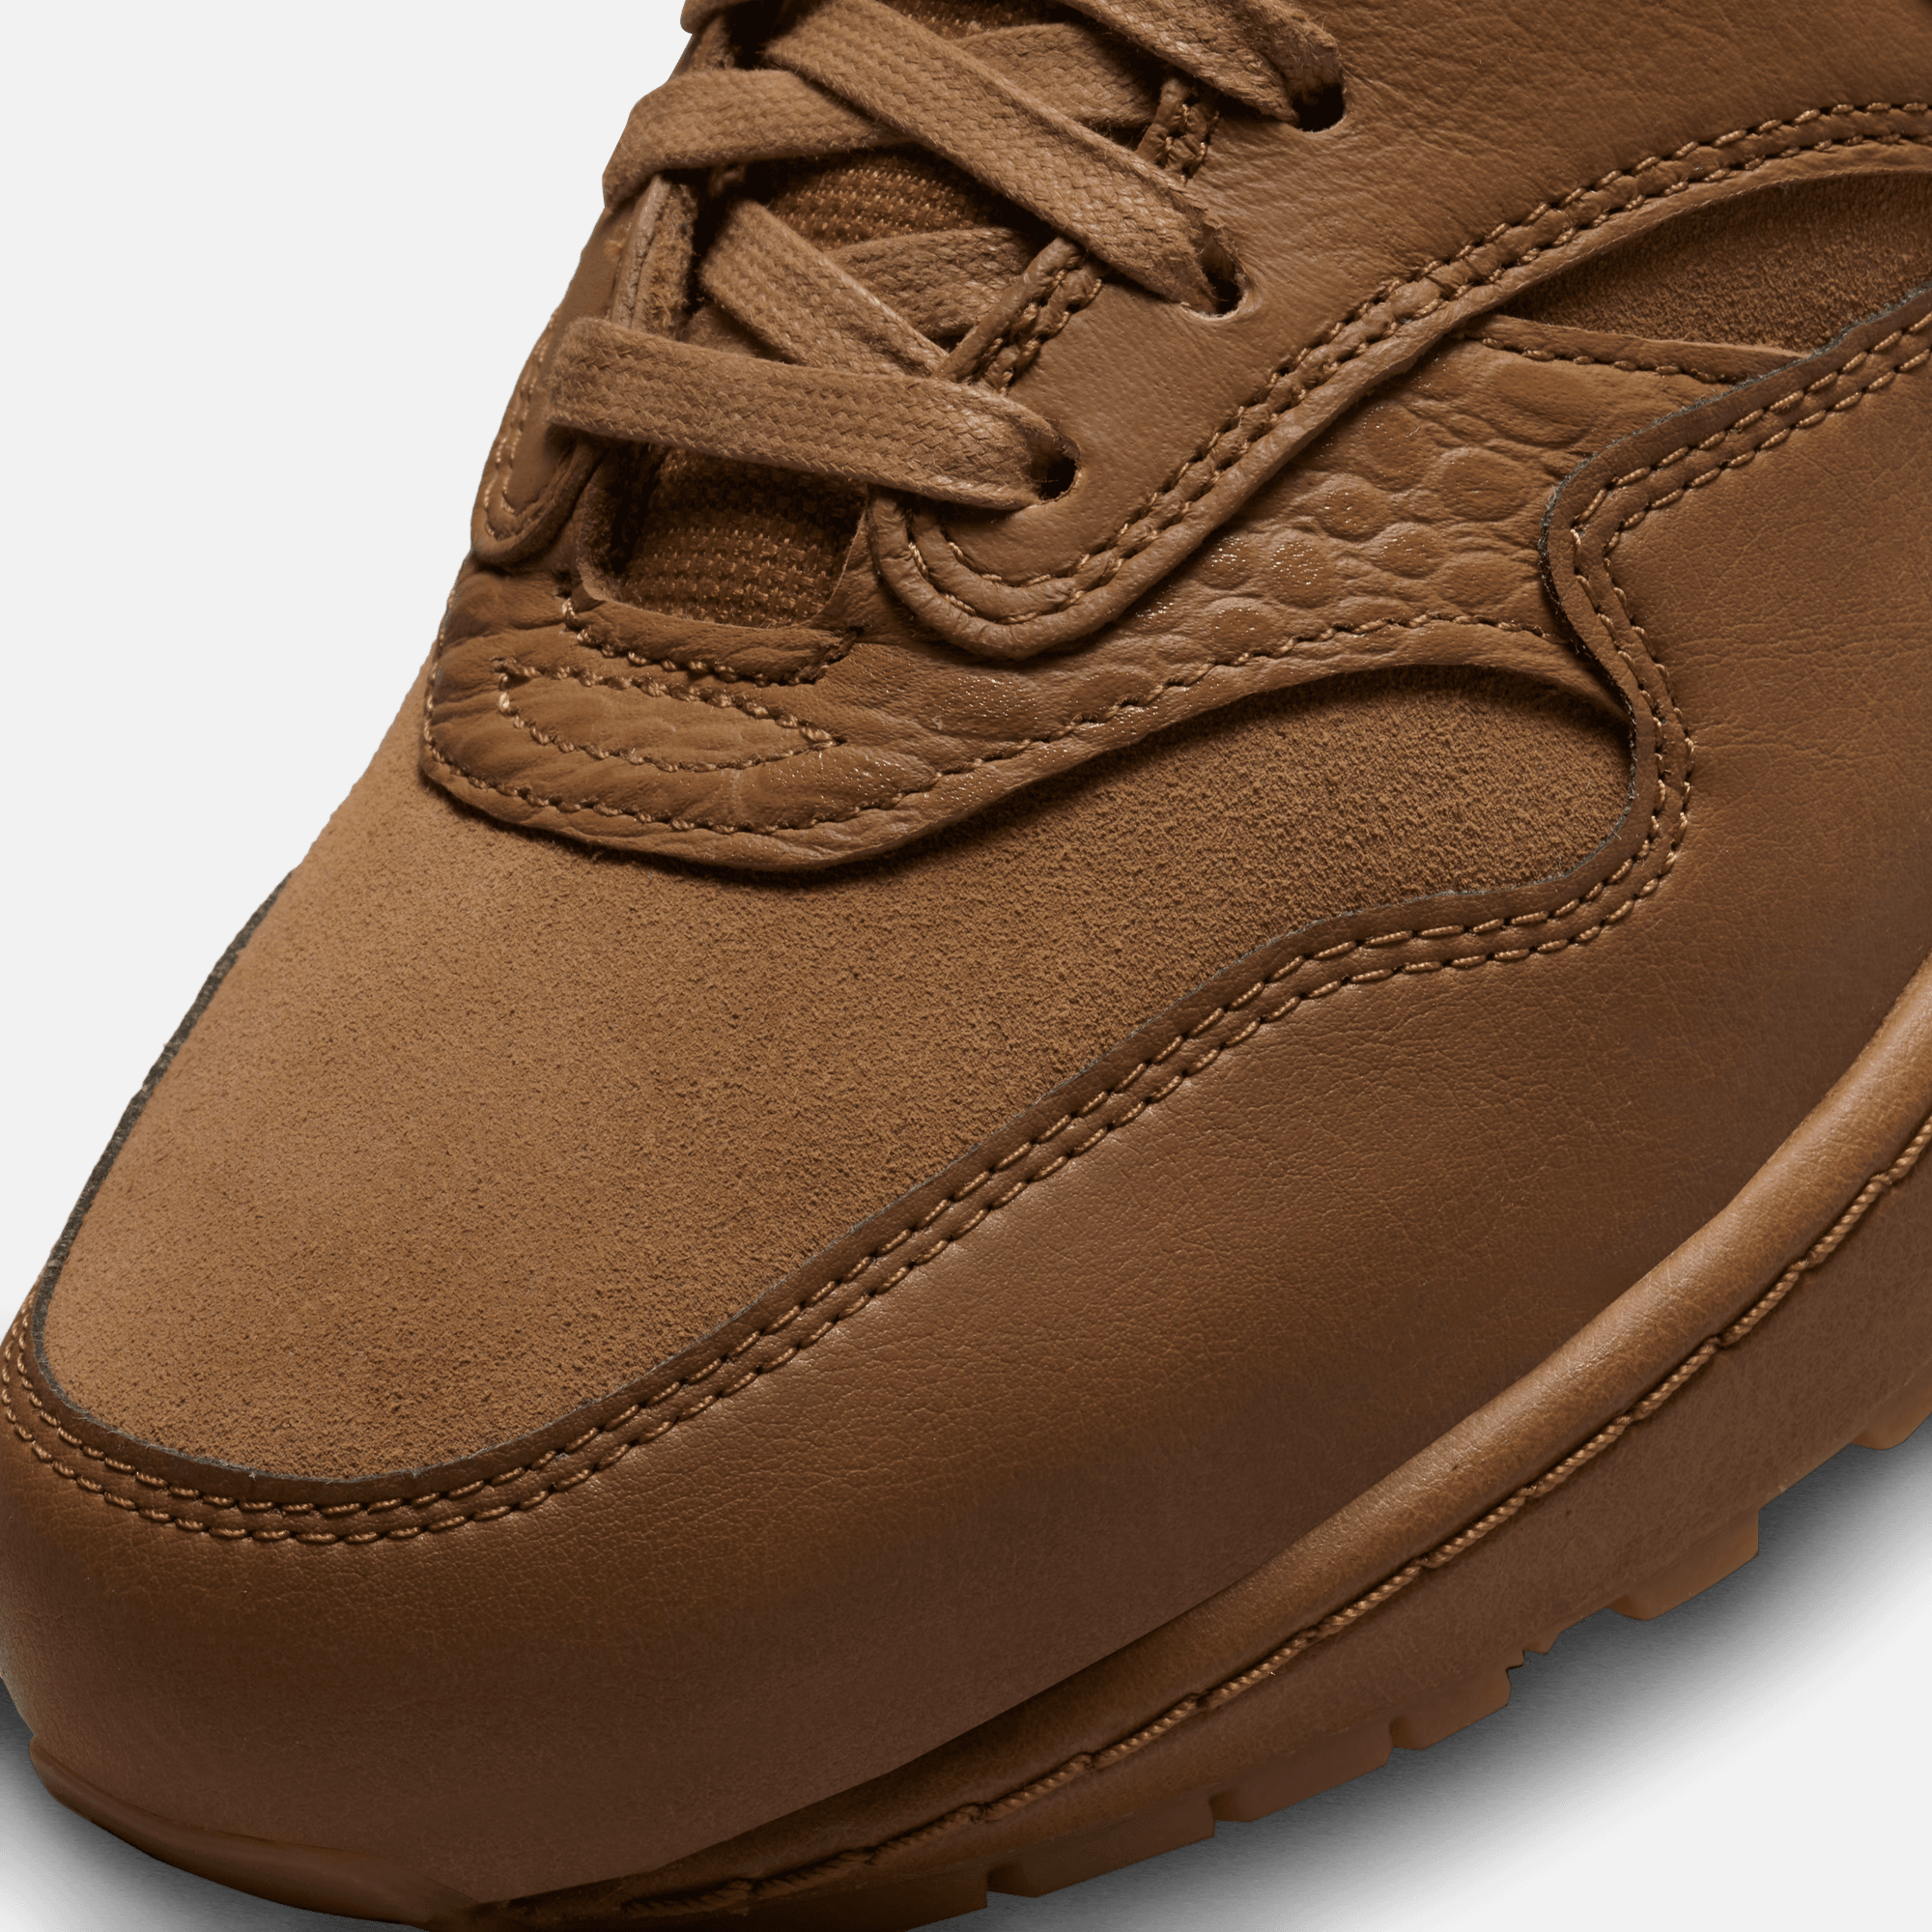 Nike Women's Air Max 1 '87 'Luxe Ale Brown'